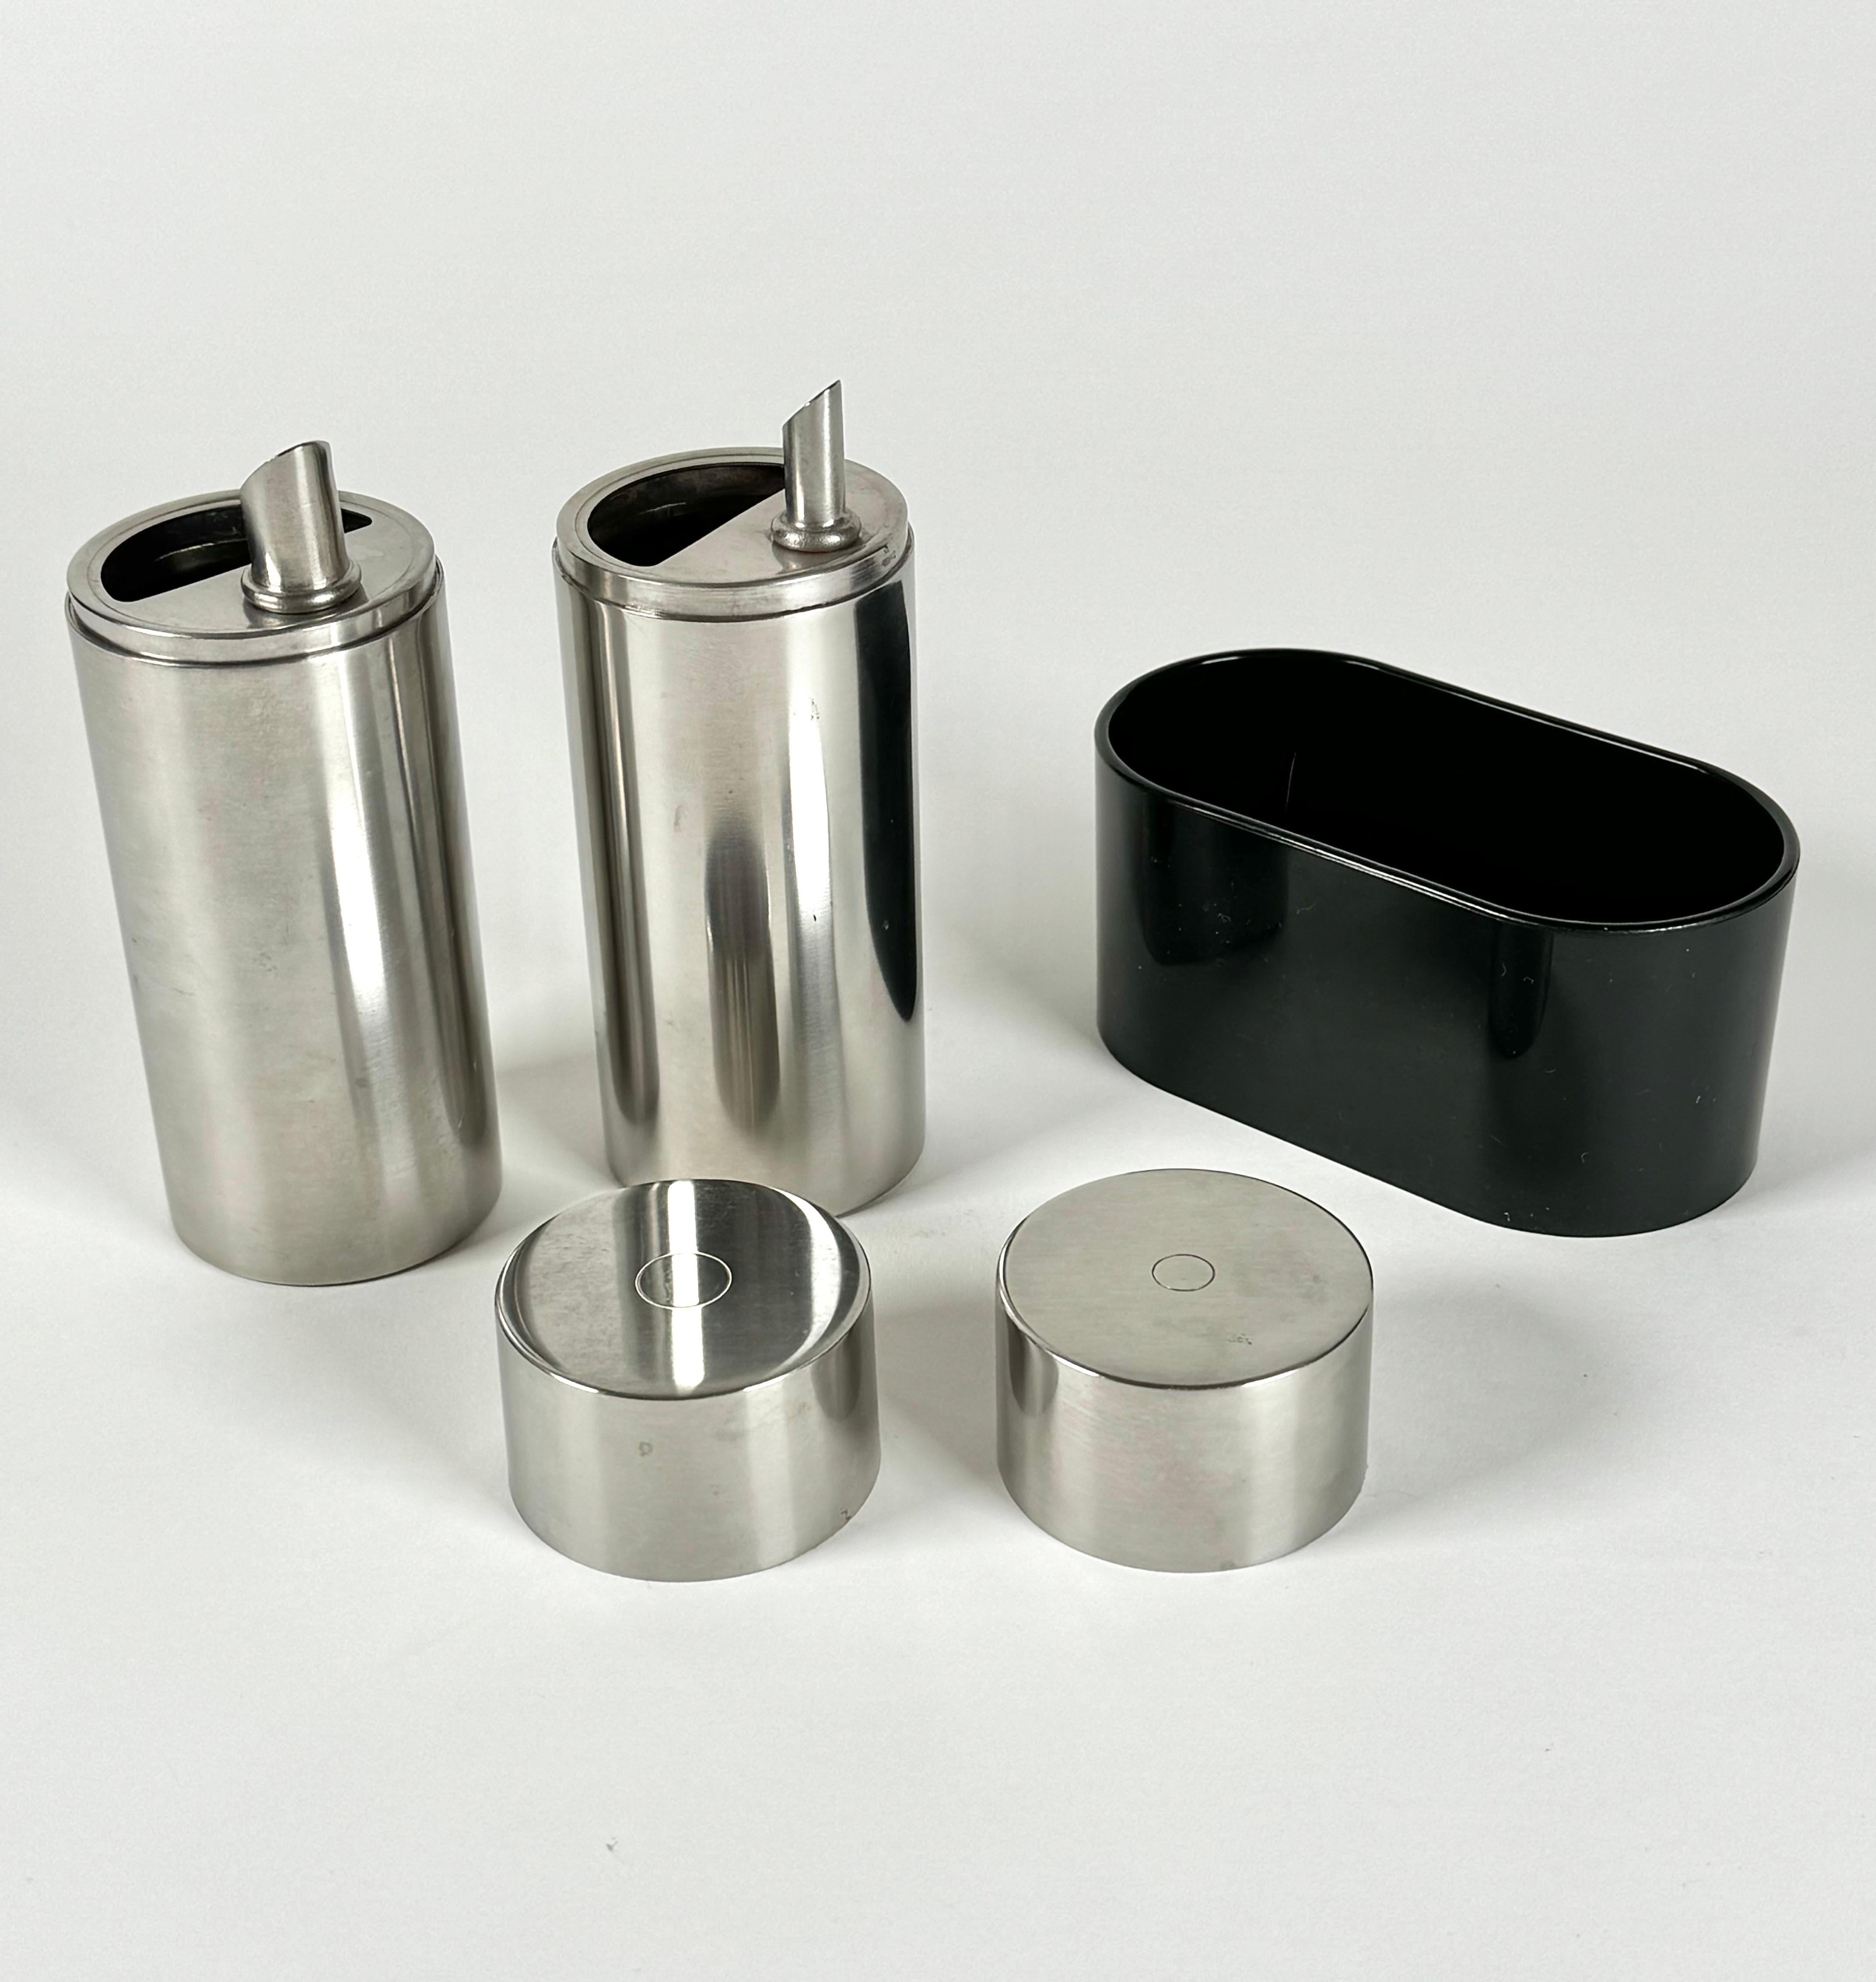 A rare and unusual set of oil and vinegar cruets designed by Danish designer Peter Holmblad for Stelton. Holmblad was the director and lead designer of Stelton, his stepfather was Arne Jacobsen and it was Holmblad who asked him to design the